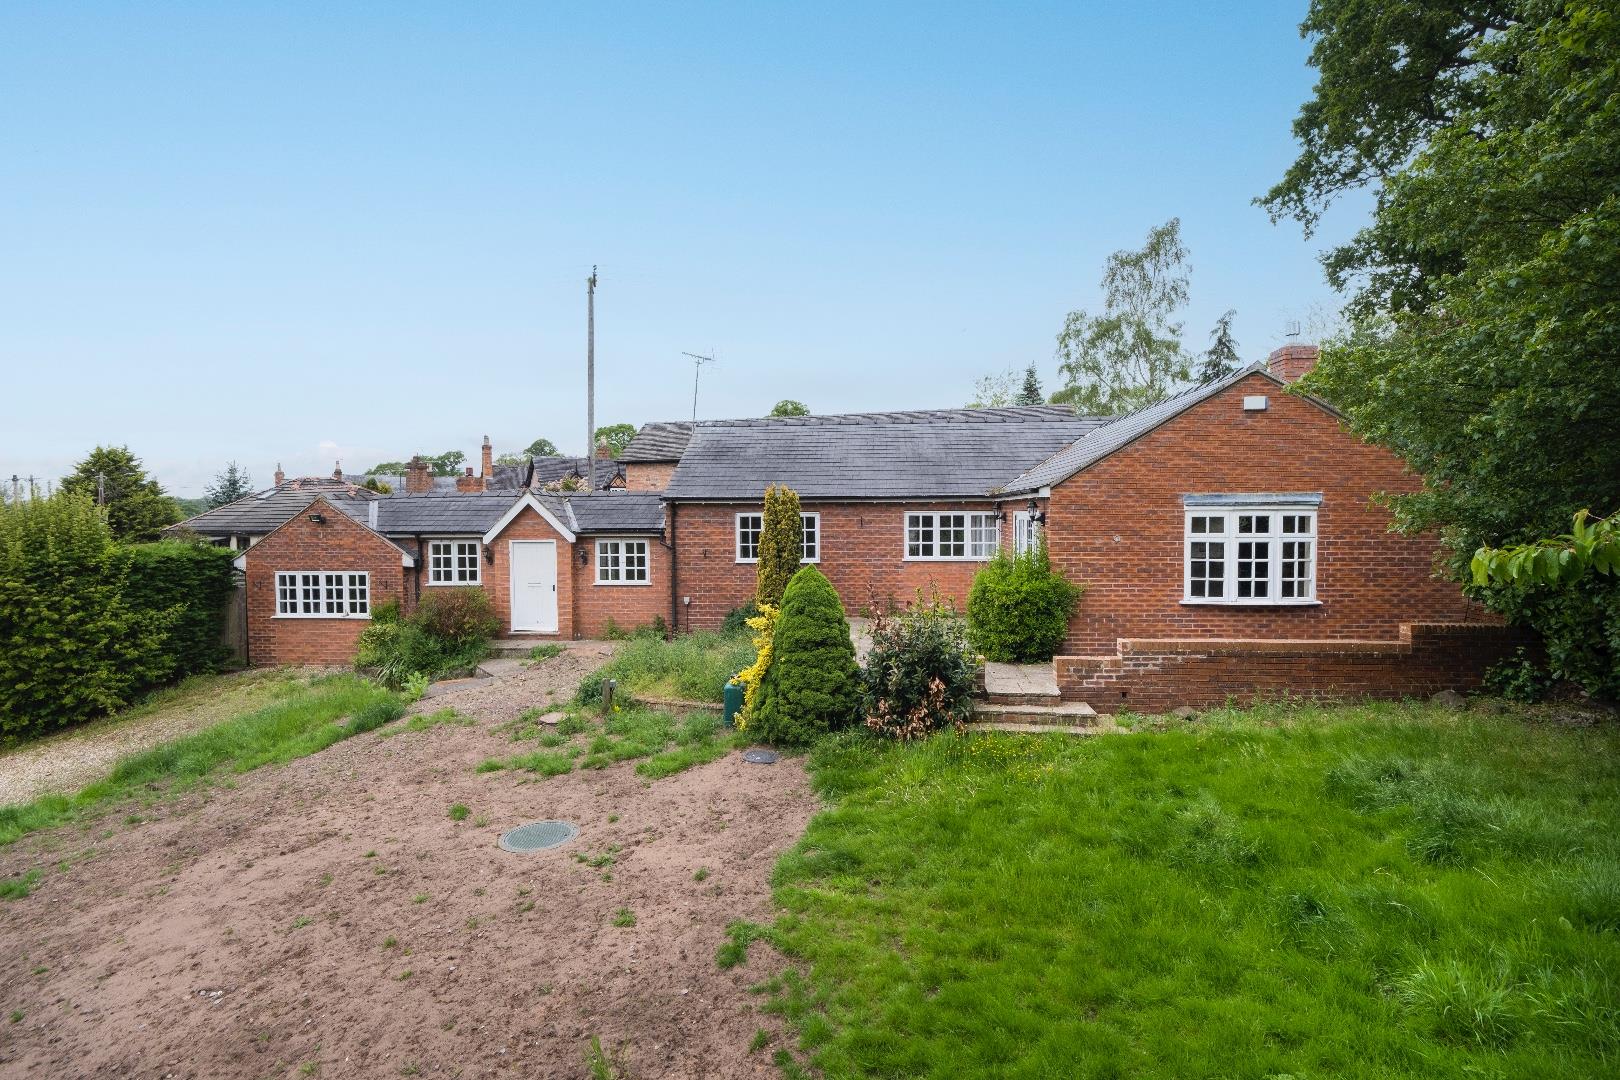 3 bedroom  Detached Bungalow for Sale in Tiverton